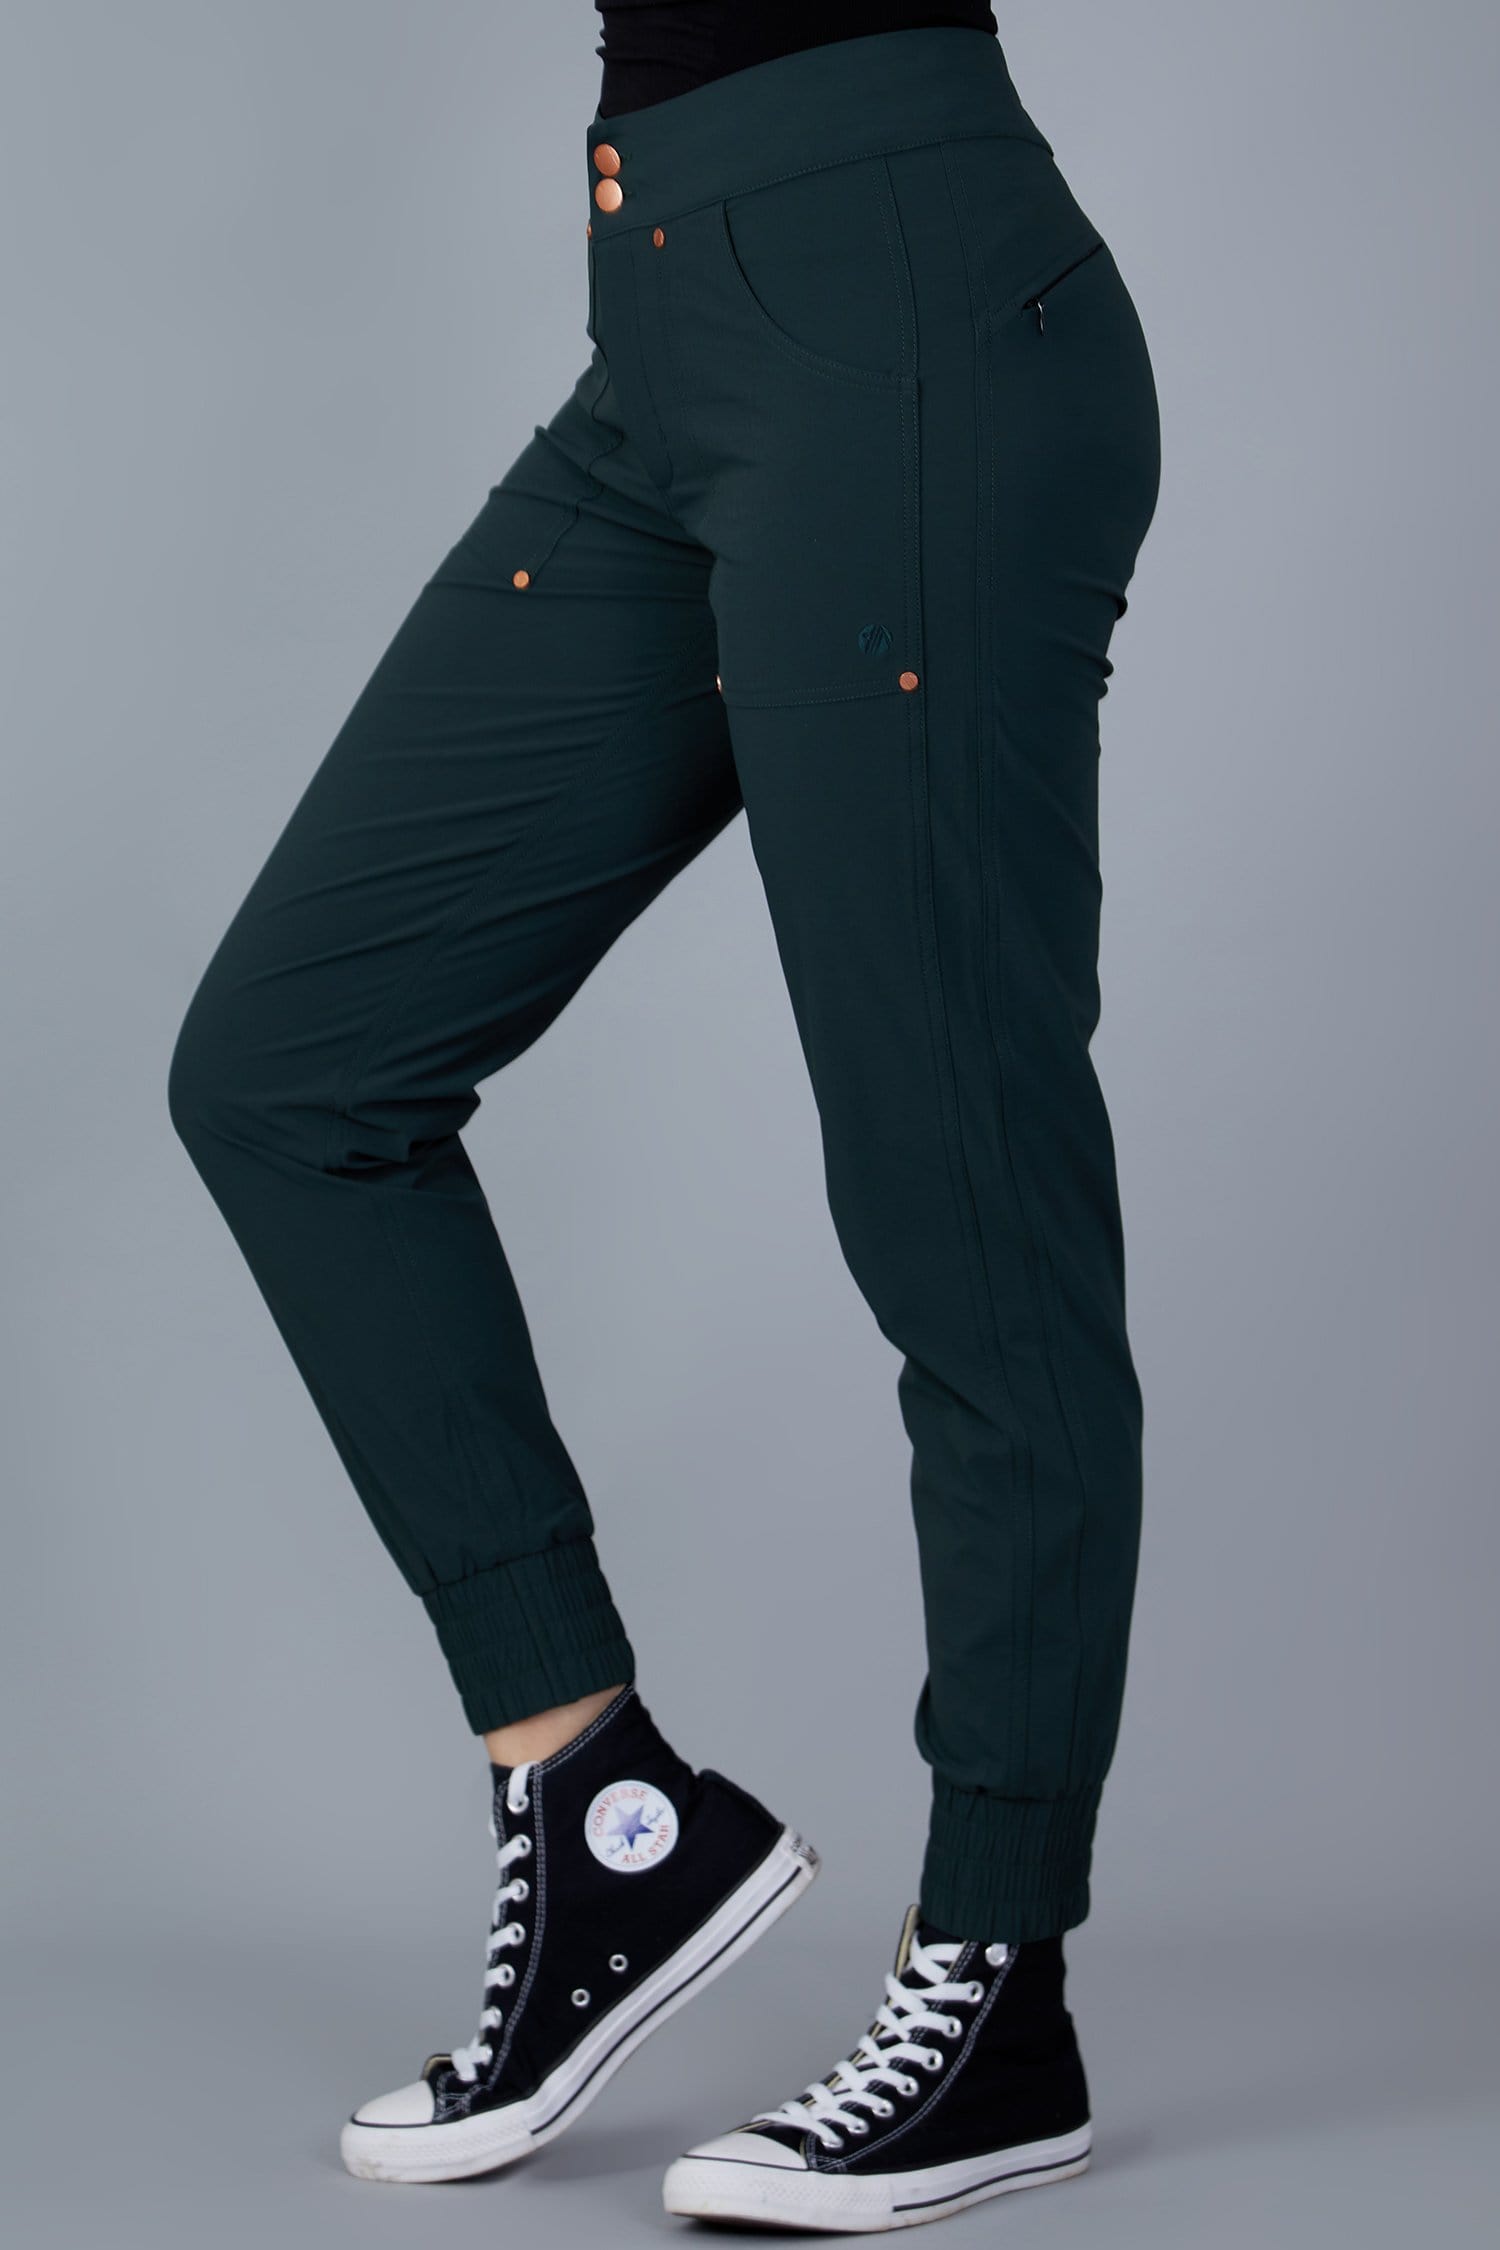 Casual Stroll Pants - Forest Green - 36l / Uk18 - Womens - Acai Outdoorwear